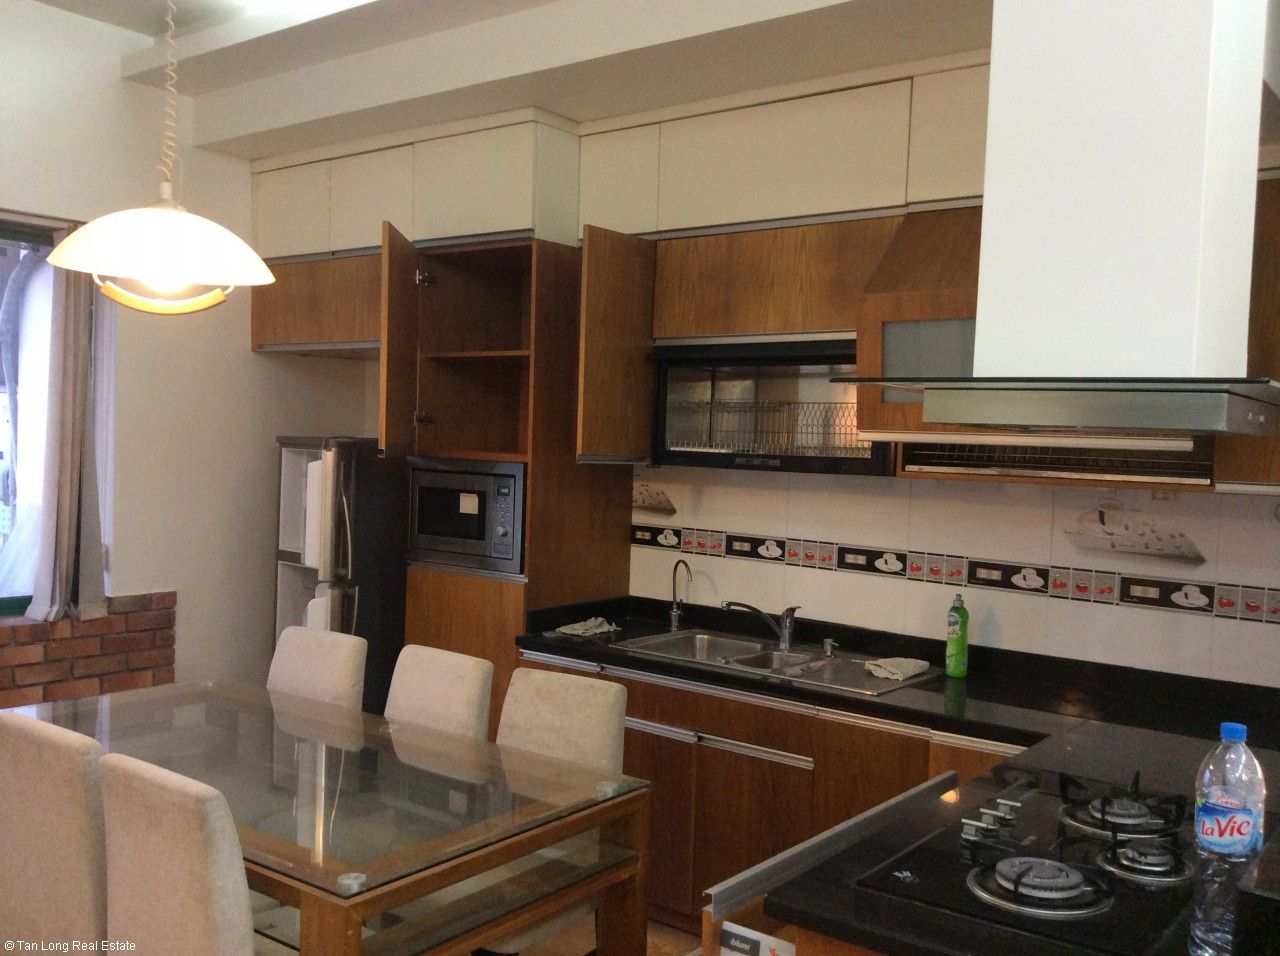 Fully equipped 3 bedroom apartment for rent in Kinh Do Building, Hai Ba Trung dist, Hanoi 6